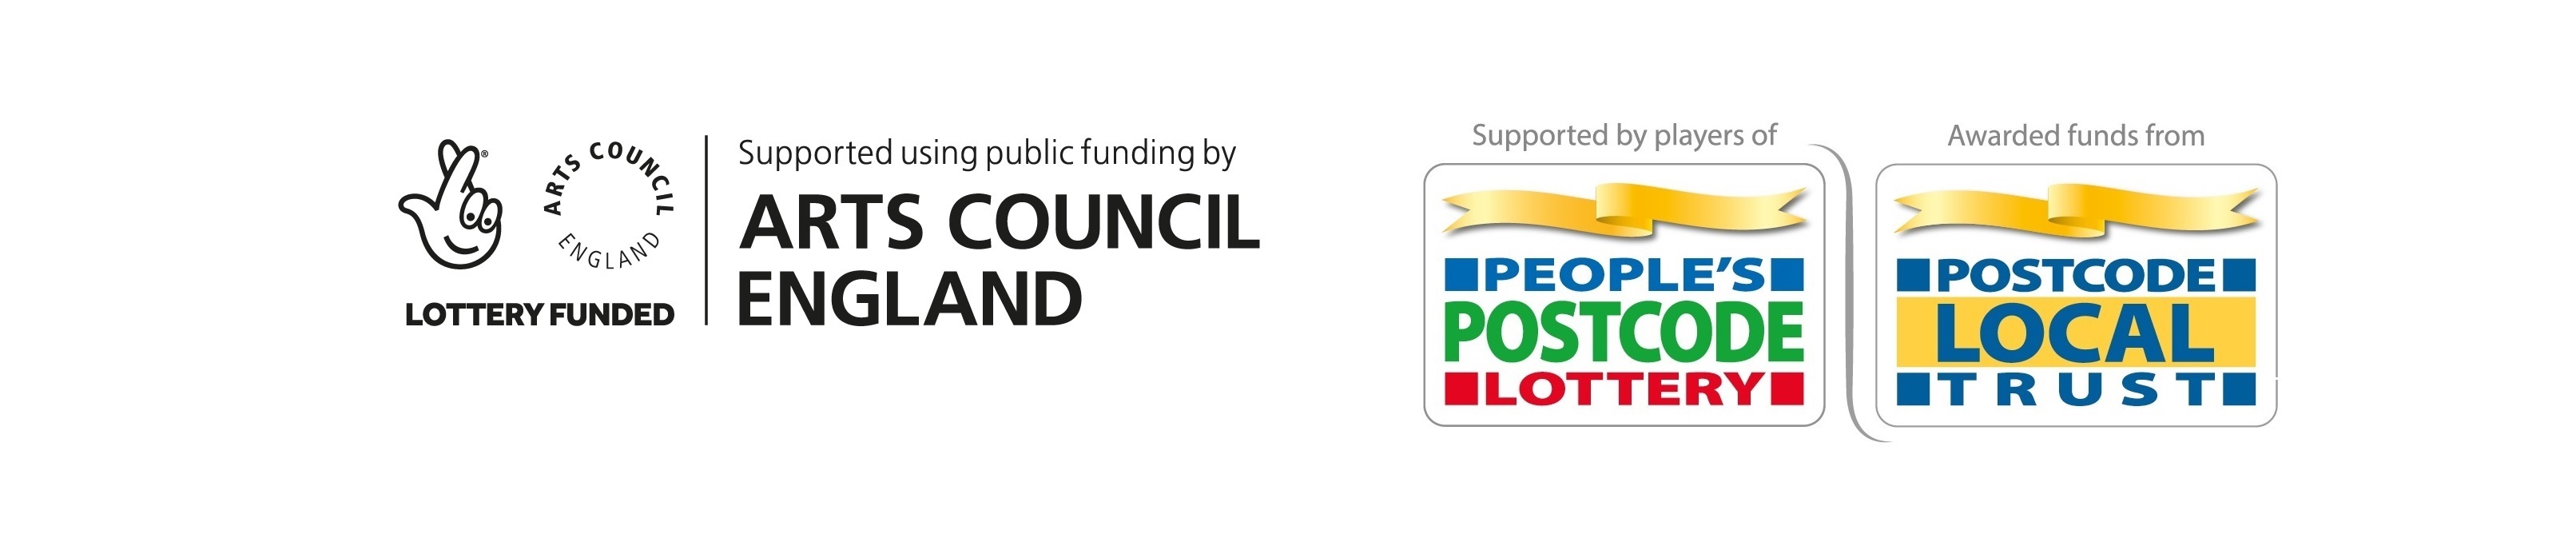 supported by the Arts Council Enfland and the Post Code Local Lottery Trust